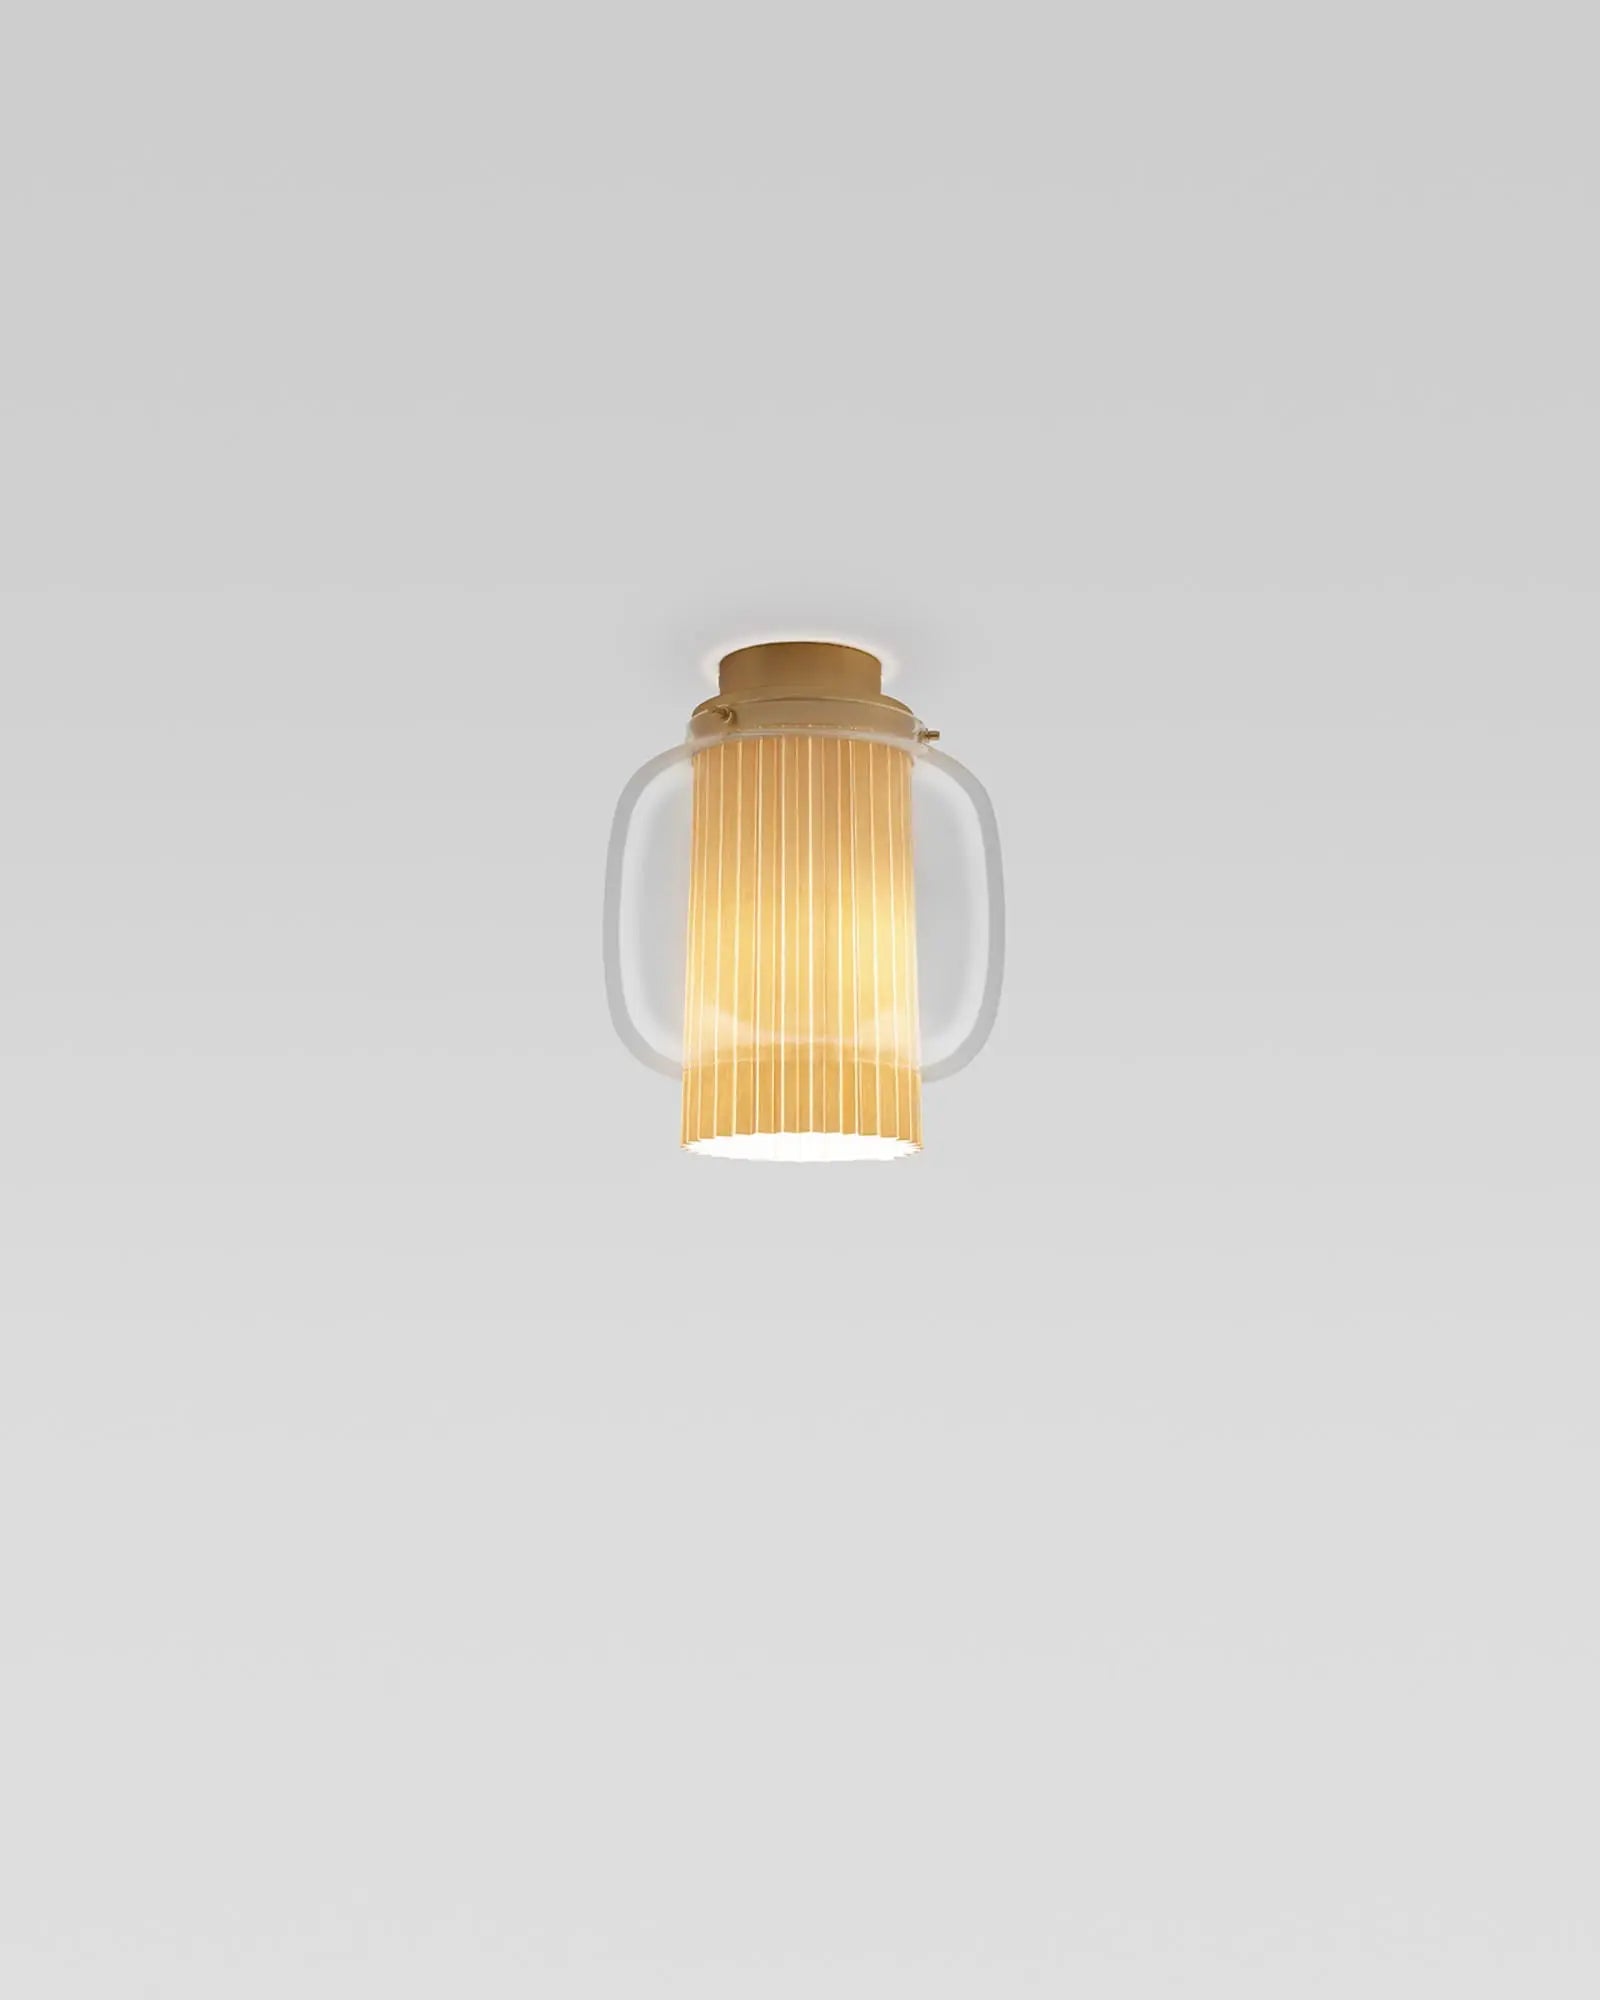 Manila Ceiling Light in gold with beige fabric small